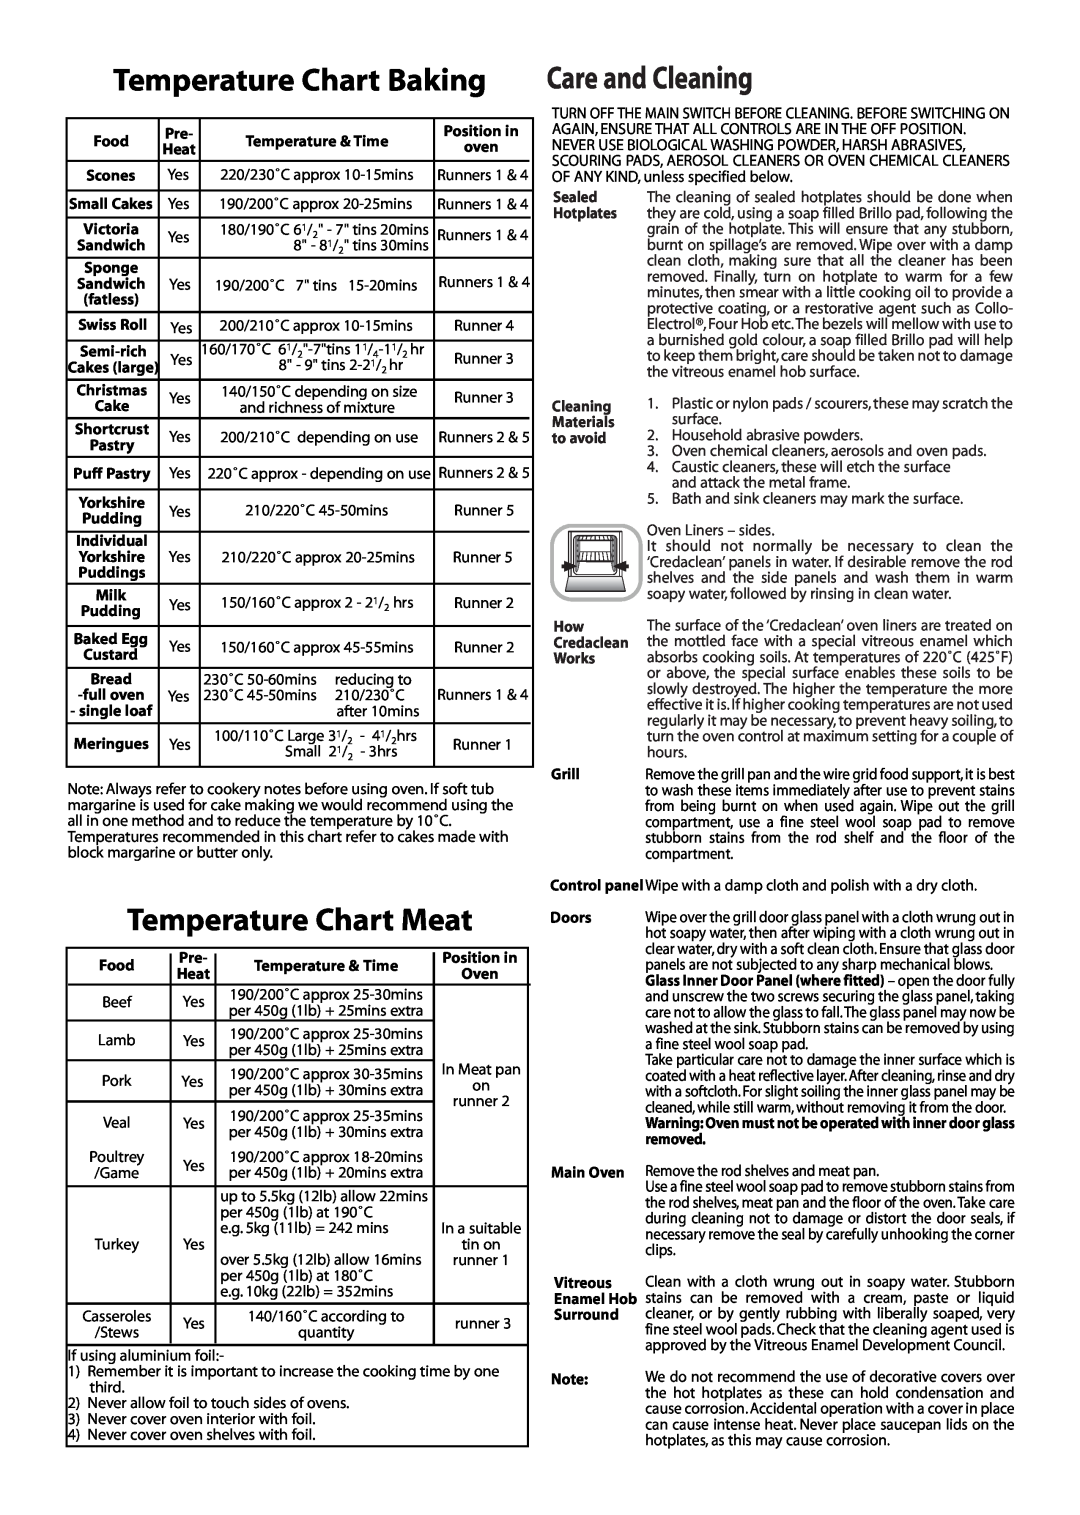 Jackson J051E installation instructions Temperature Chart Baking, Care and Cleaning, Temperature Chart Meat 